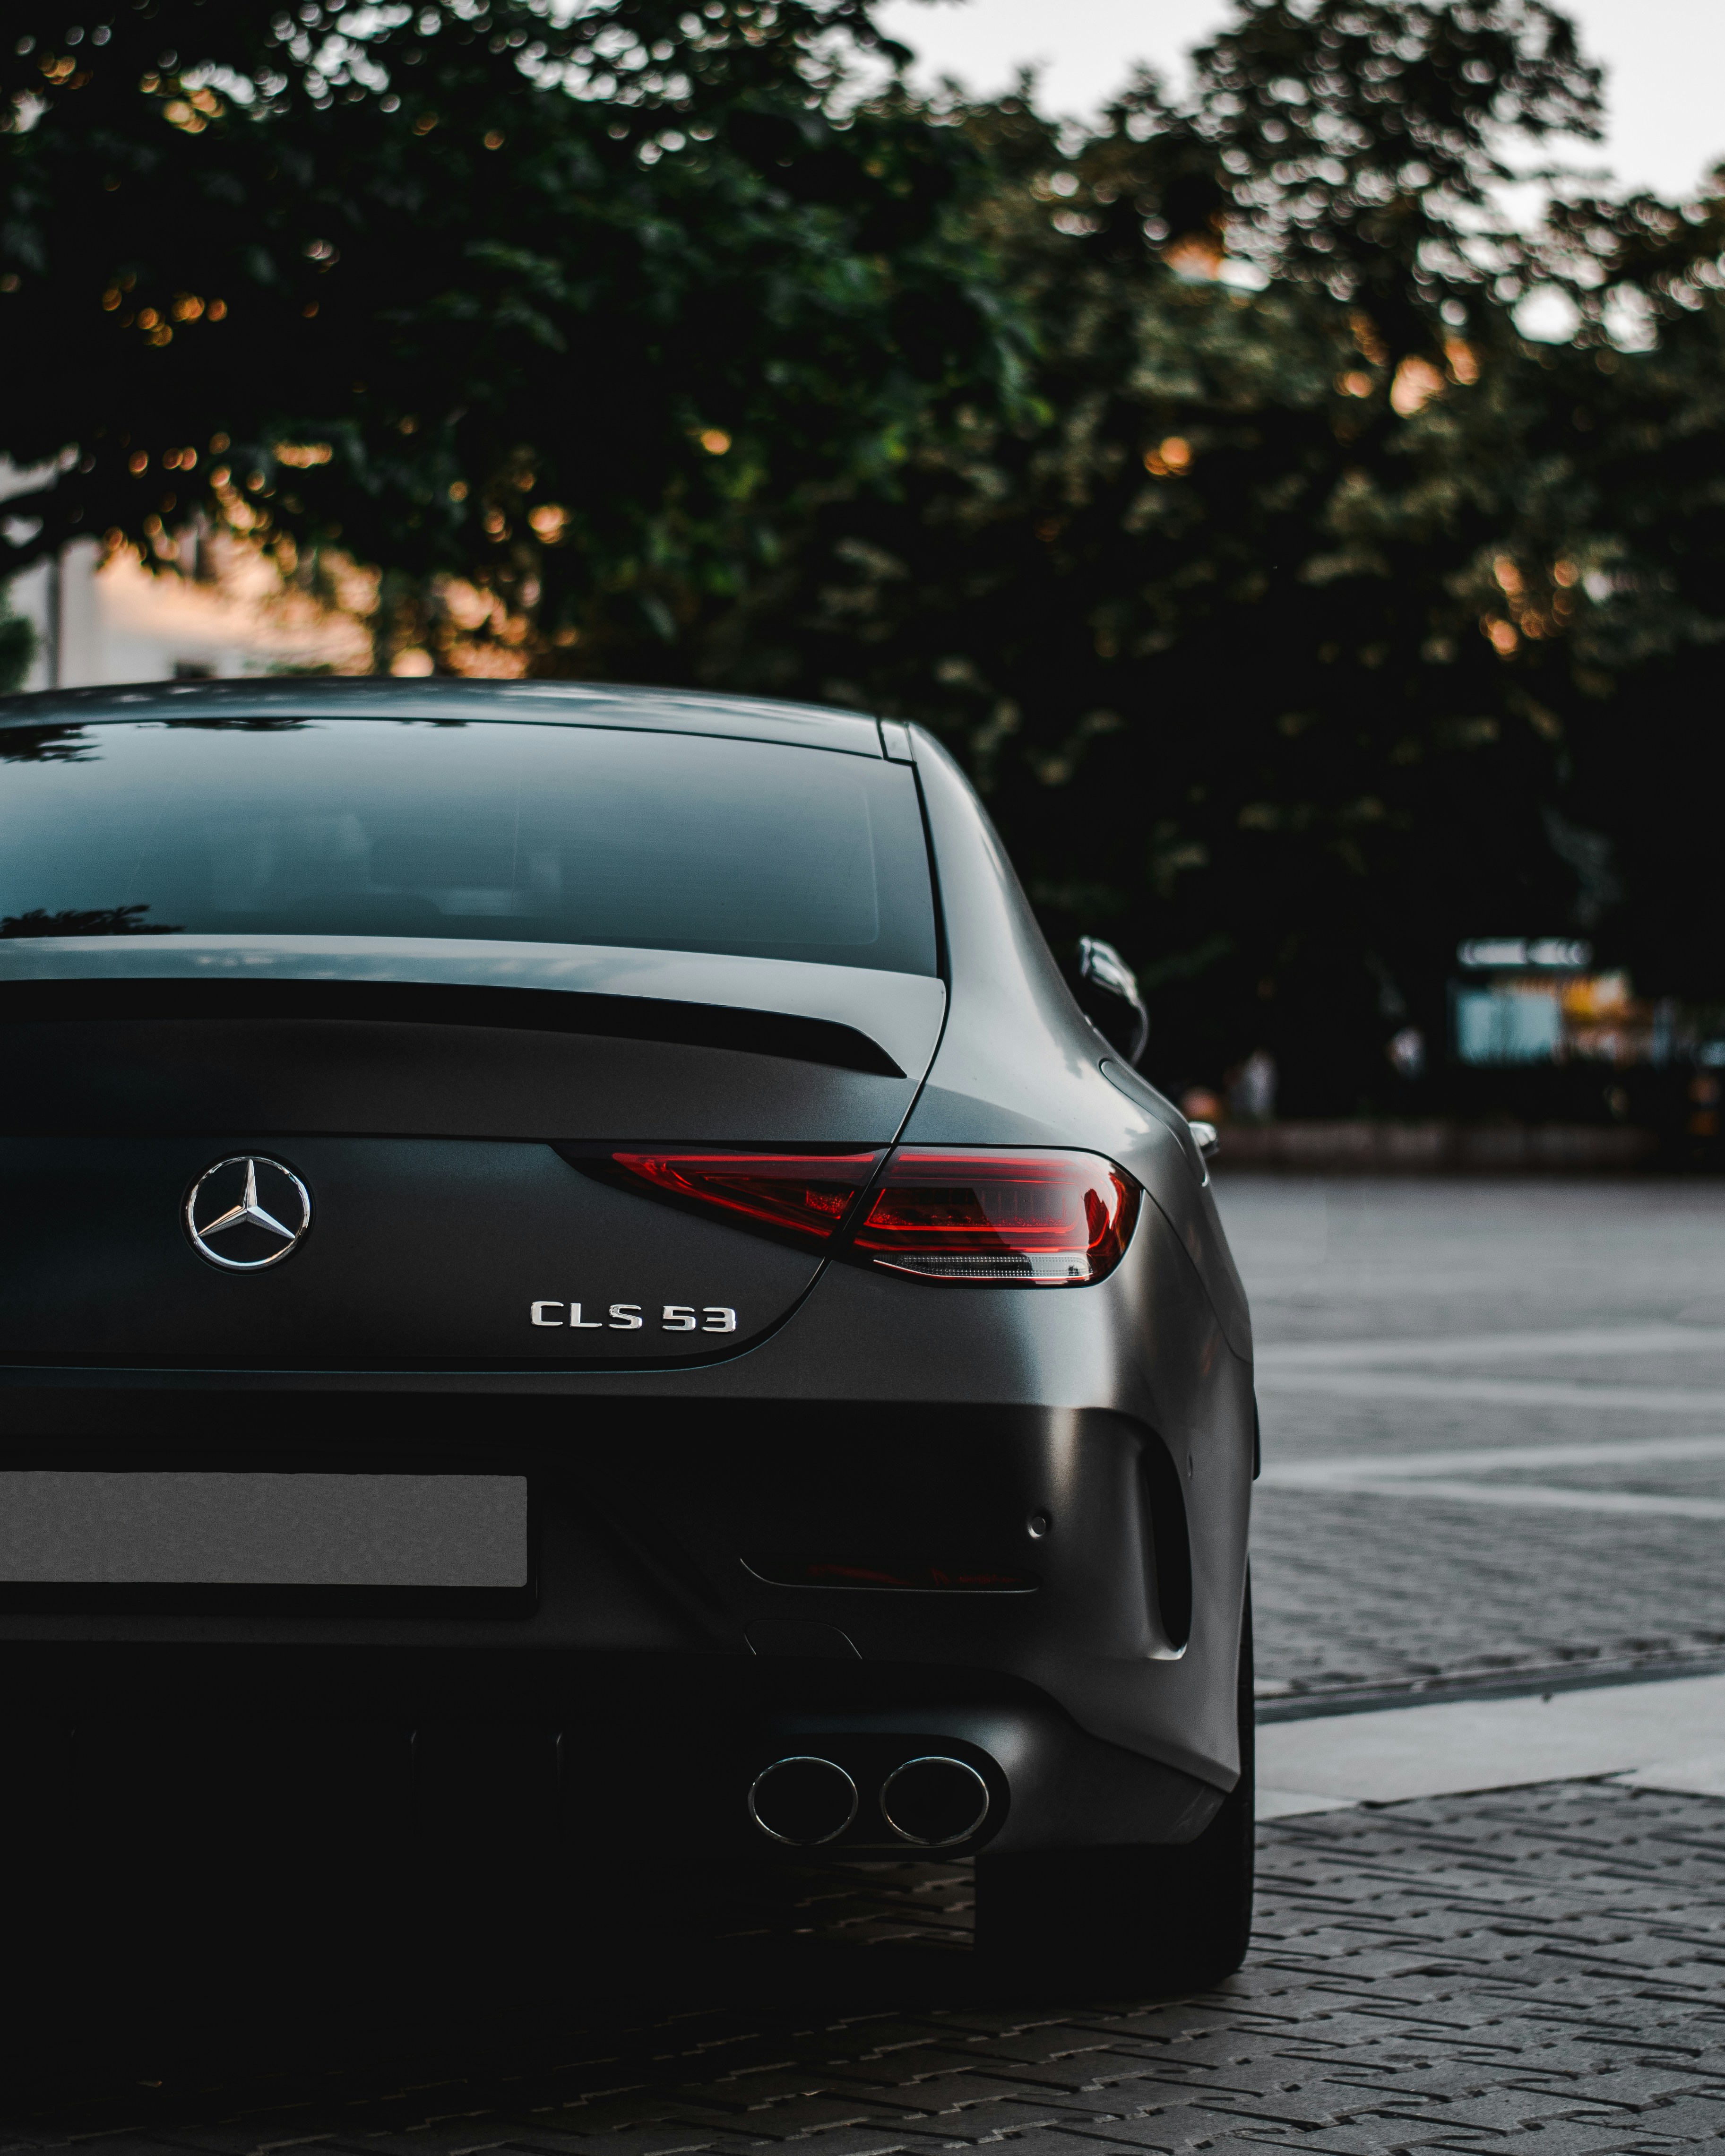 Choose from a curated selection of car photos. Always free on Unsplash.